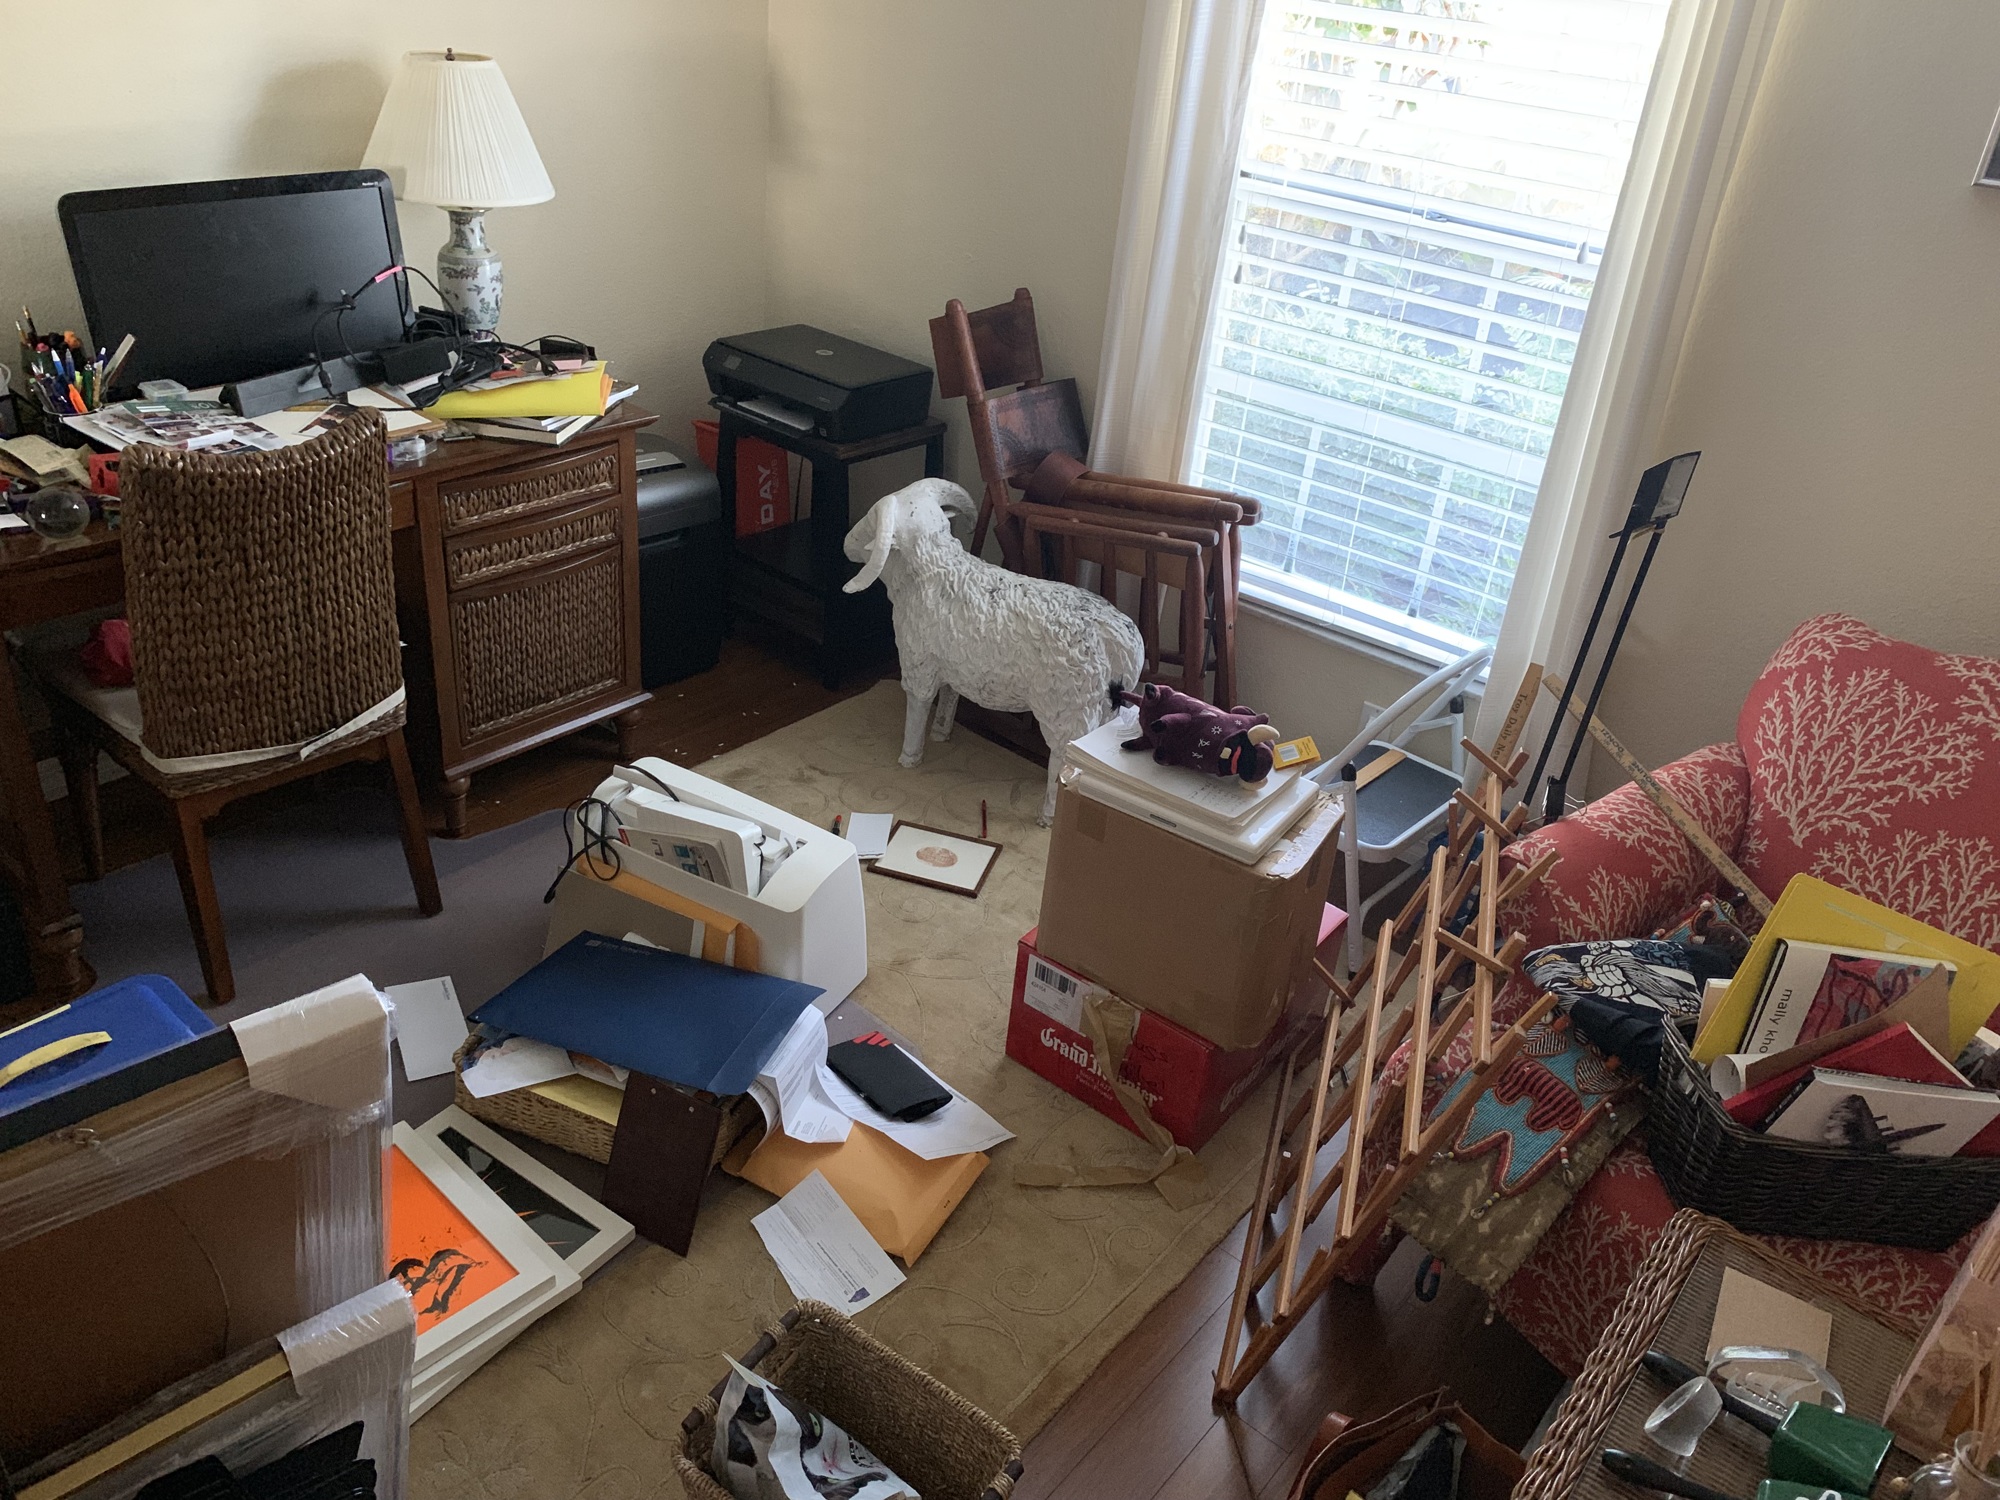 Courtesy. Marla Ottenstein, owner of Professional Organizer Florida, who brands herself as Naples’ Premier Professional Organizer, helped one client get an office-den in order after a move. (See 